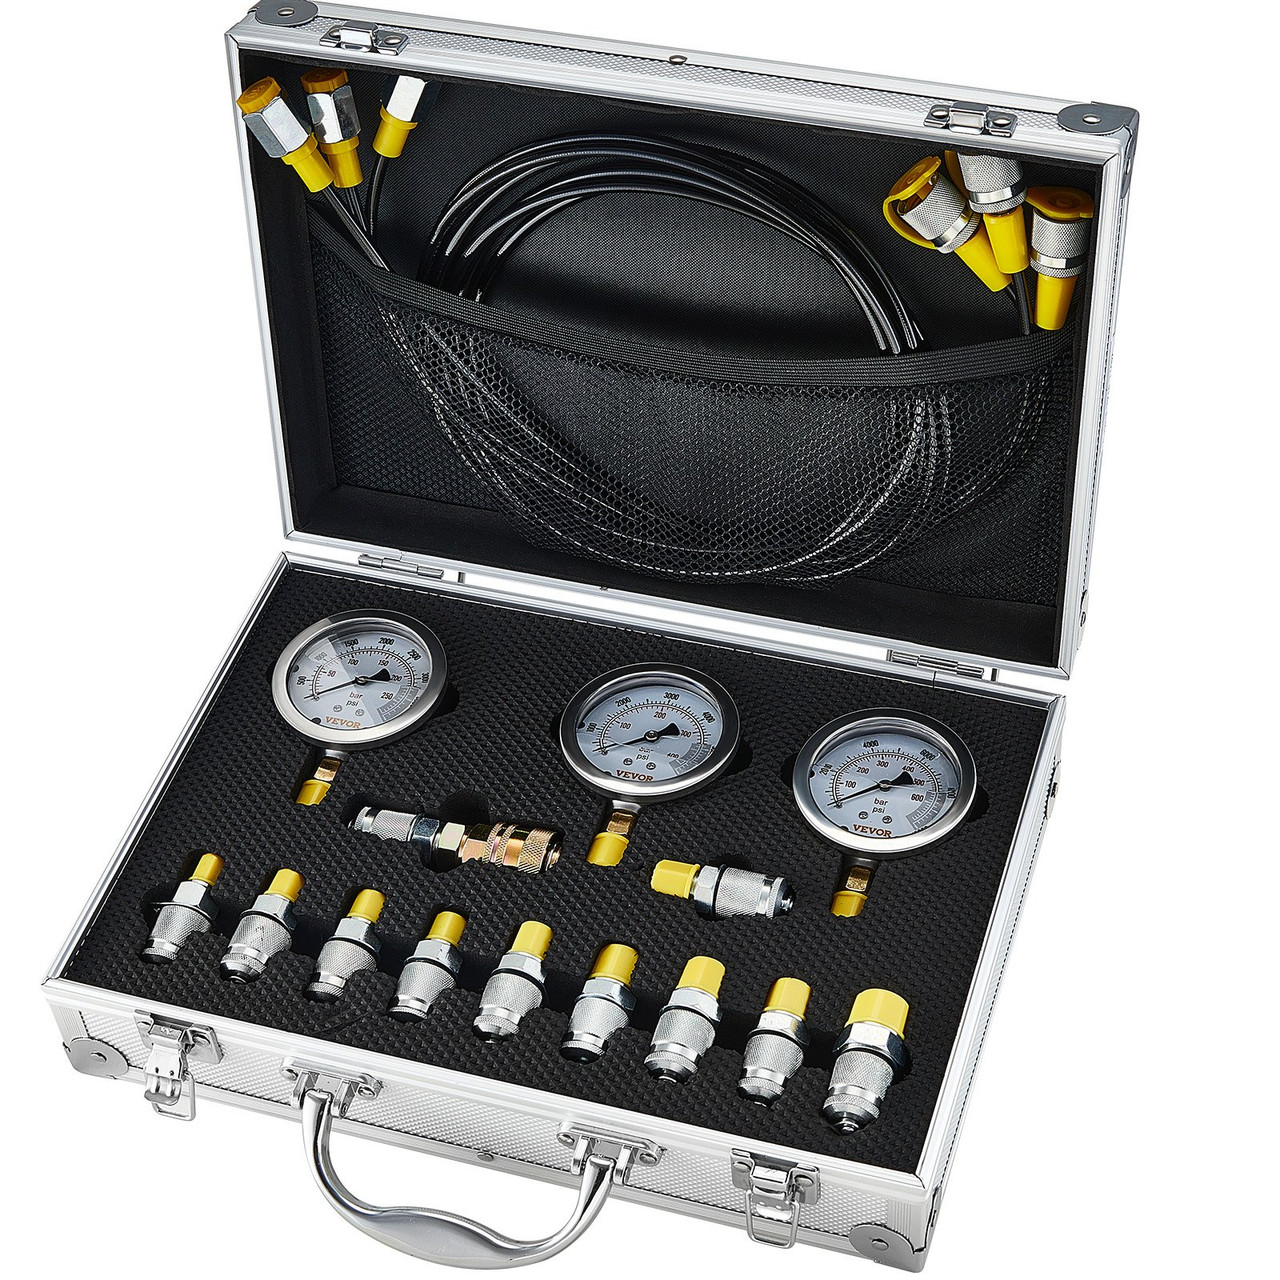 VEVOR Hydraulic Pressure Test Kit, 250/400/600bar, 3 Gauges 11 Test Couplings 3 Test Hoses, Excavator Hydraulic Test Gauge Set with Portable Carrying Case for Excavator Tractors Construction Machinery